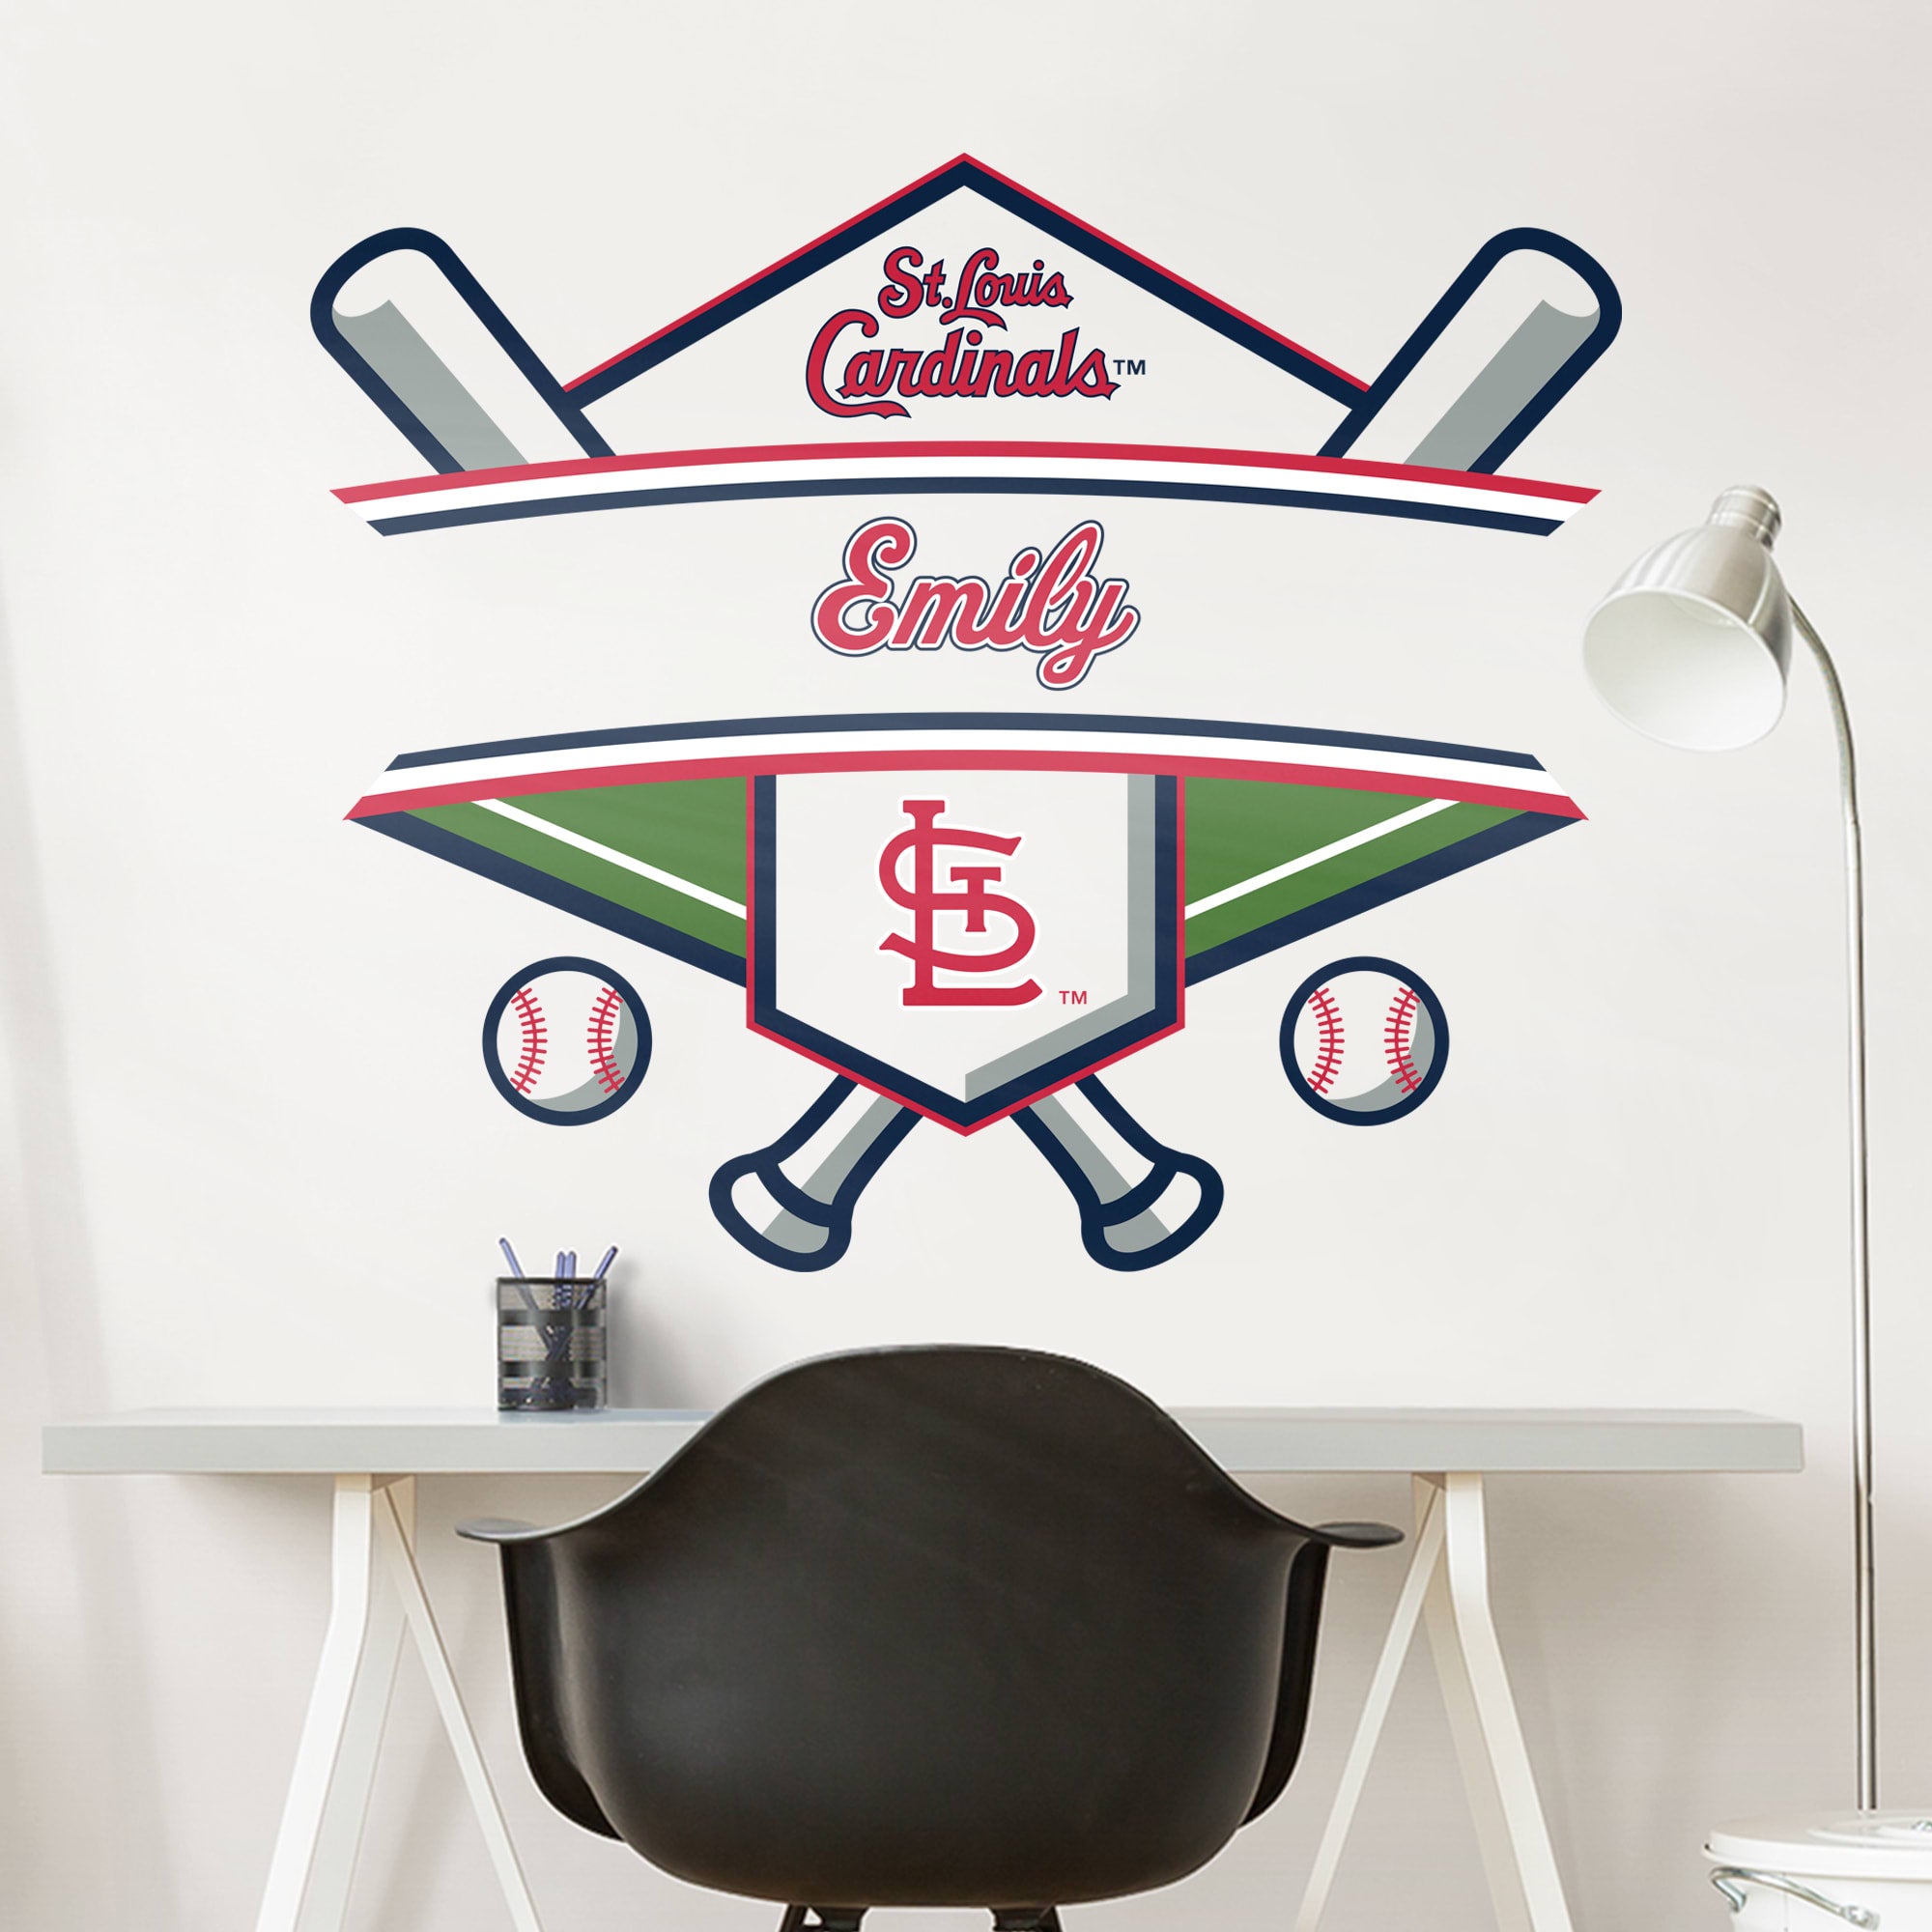 St. Louis Cardinals: Personalized Name - Officially Licensed MLB Transfer Decal 45.0"W x 38.0"H by Fathead | Vinyl